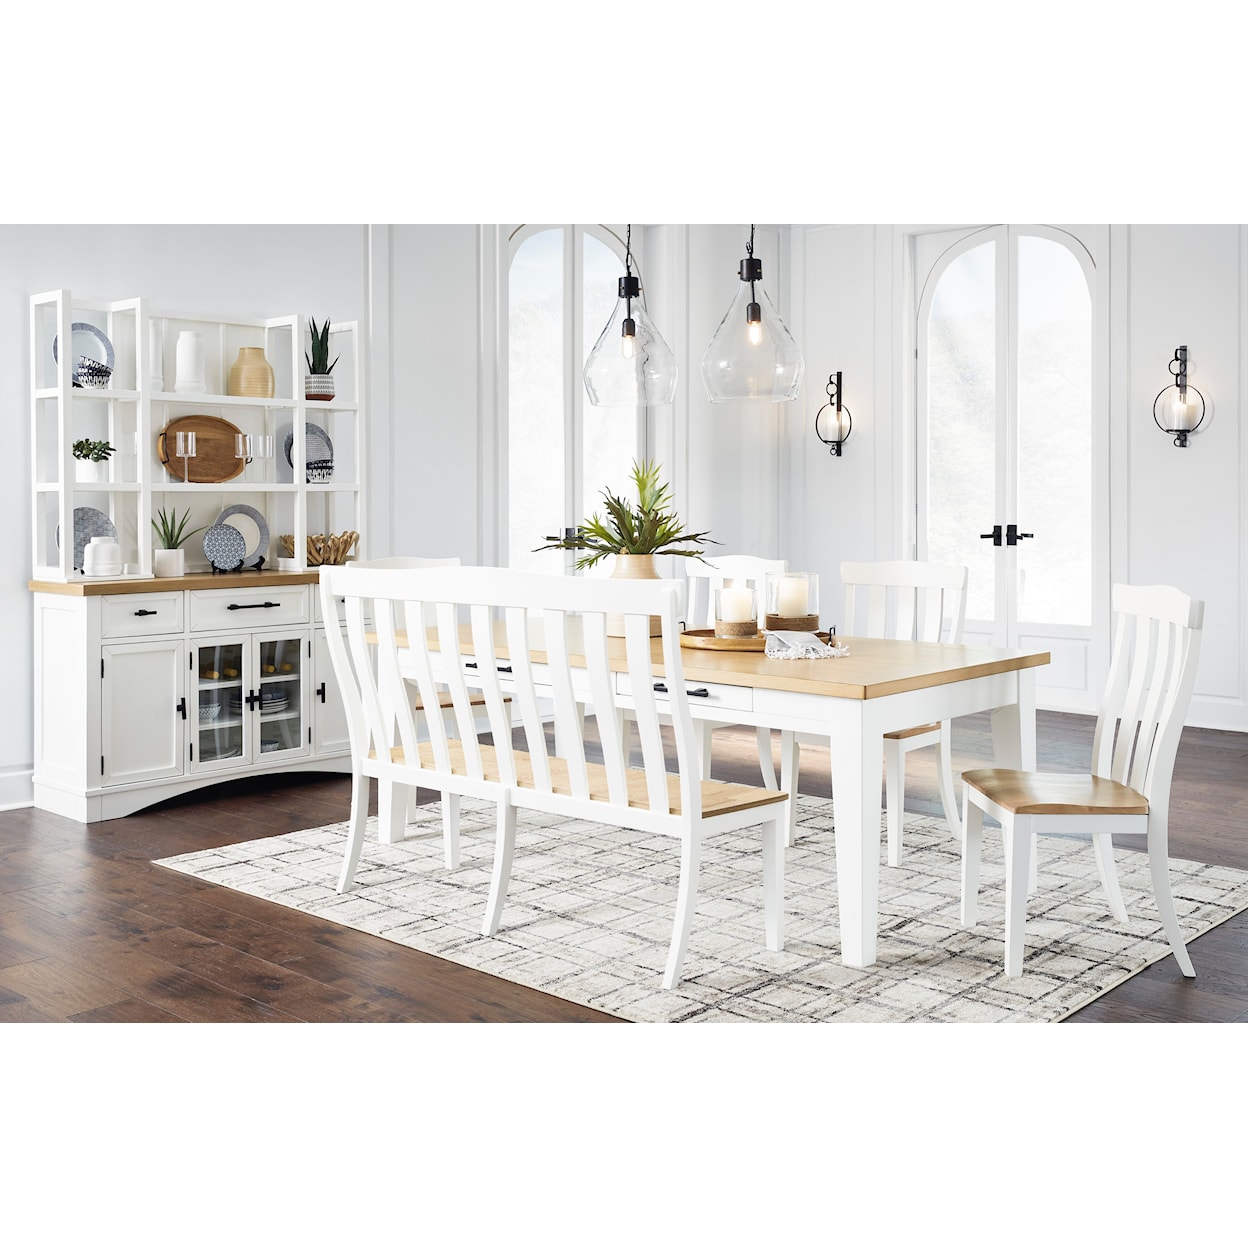 Signature Design by Ashley Ashbryn Dining Set with Bench